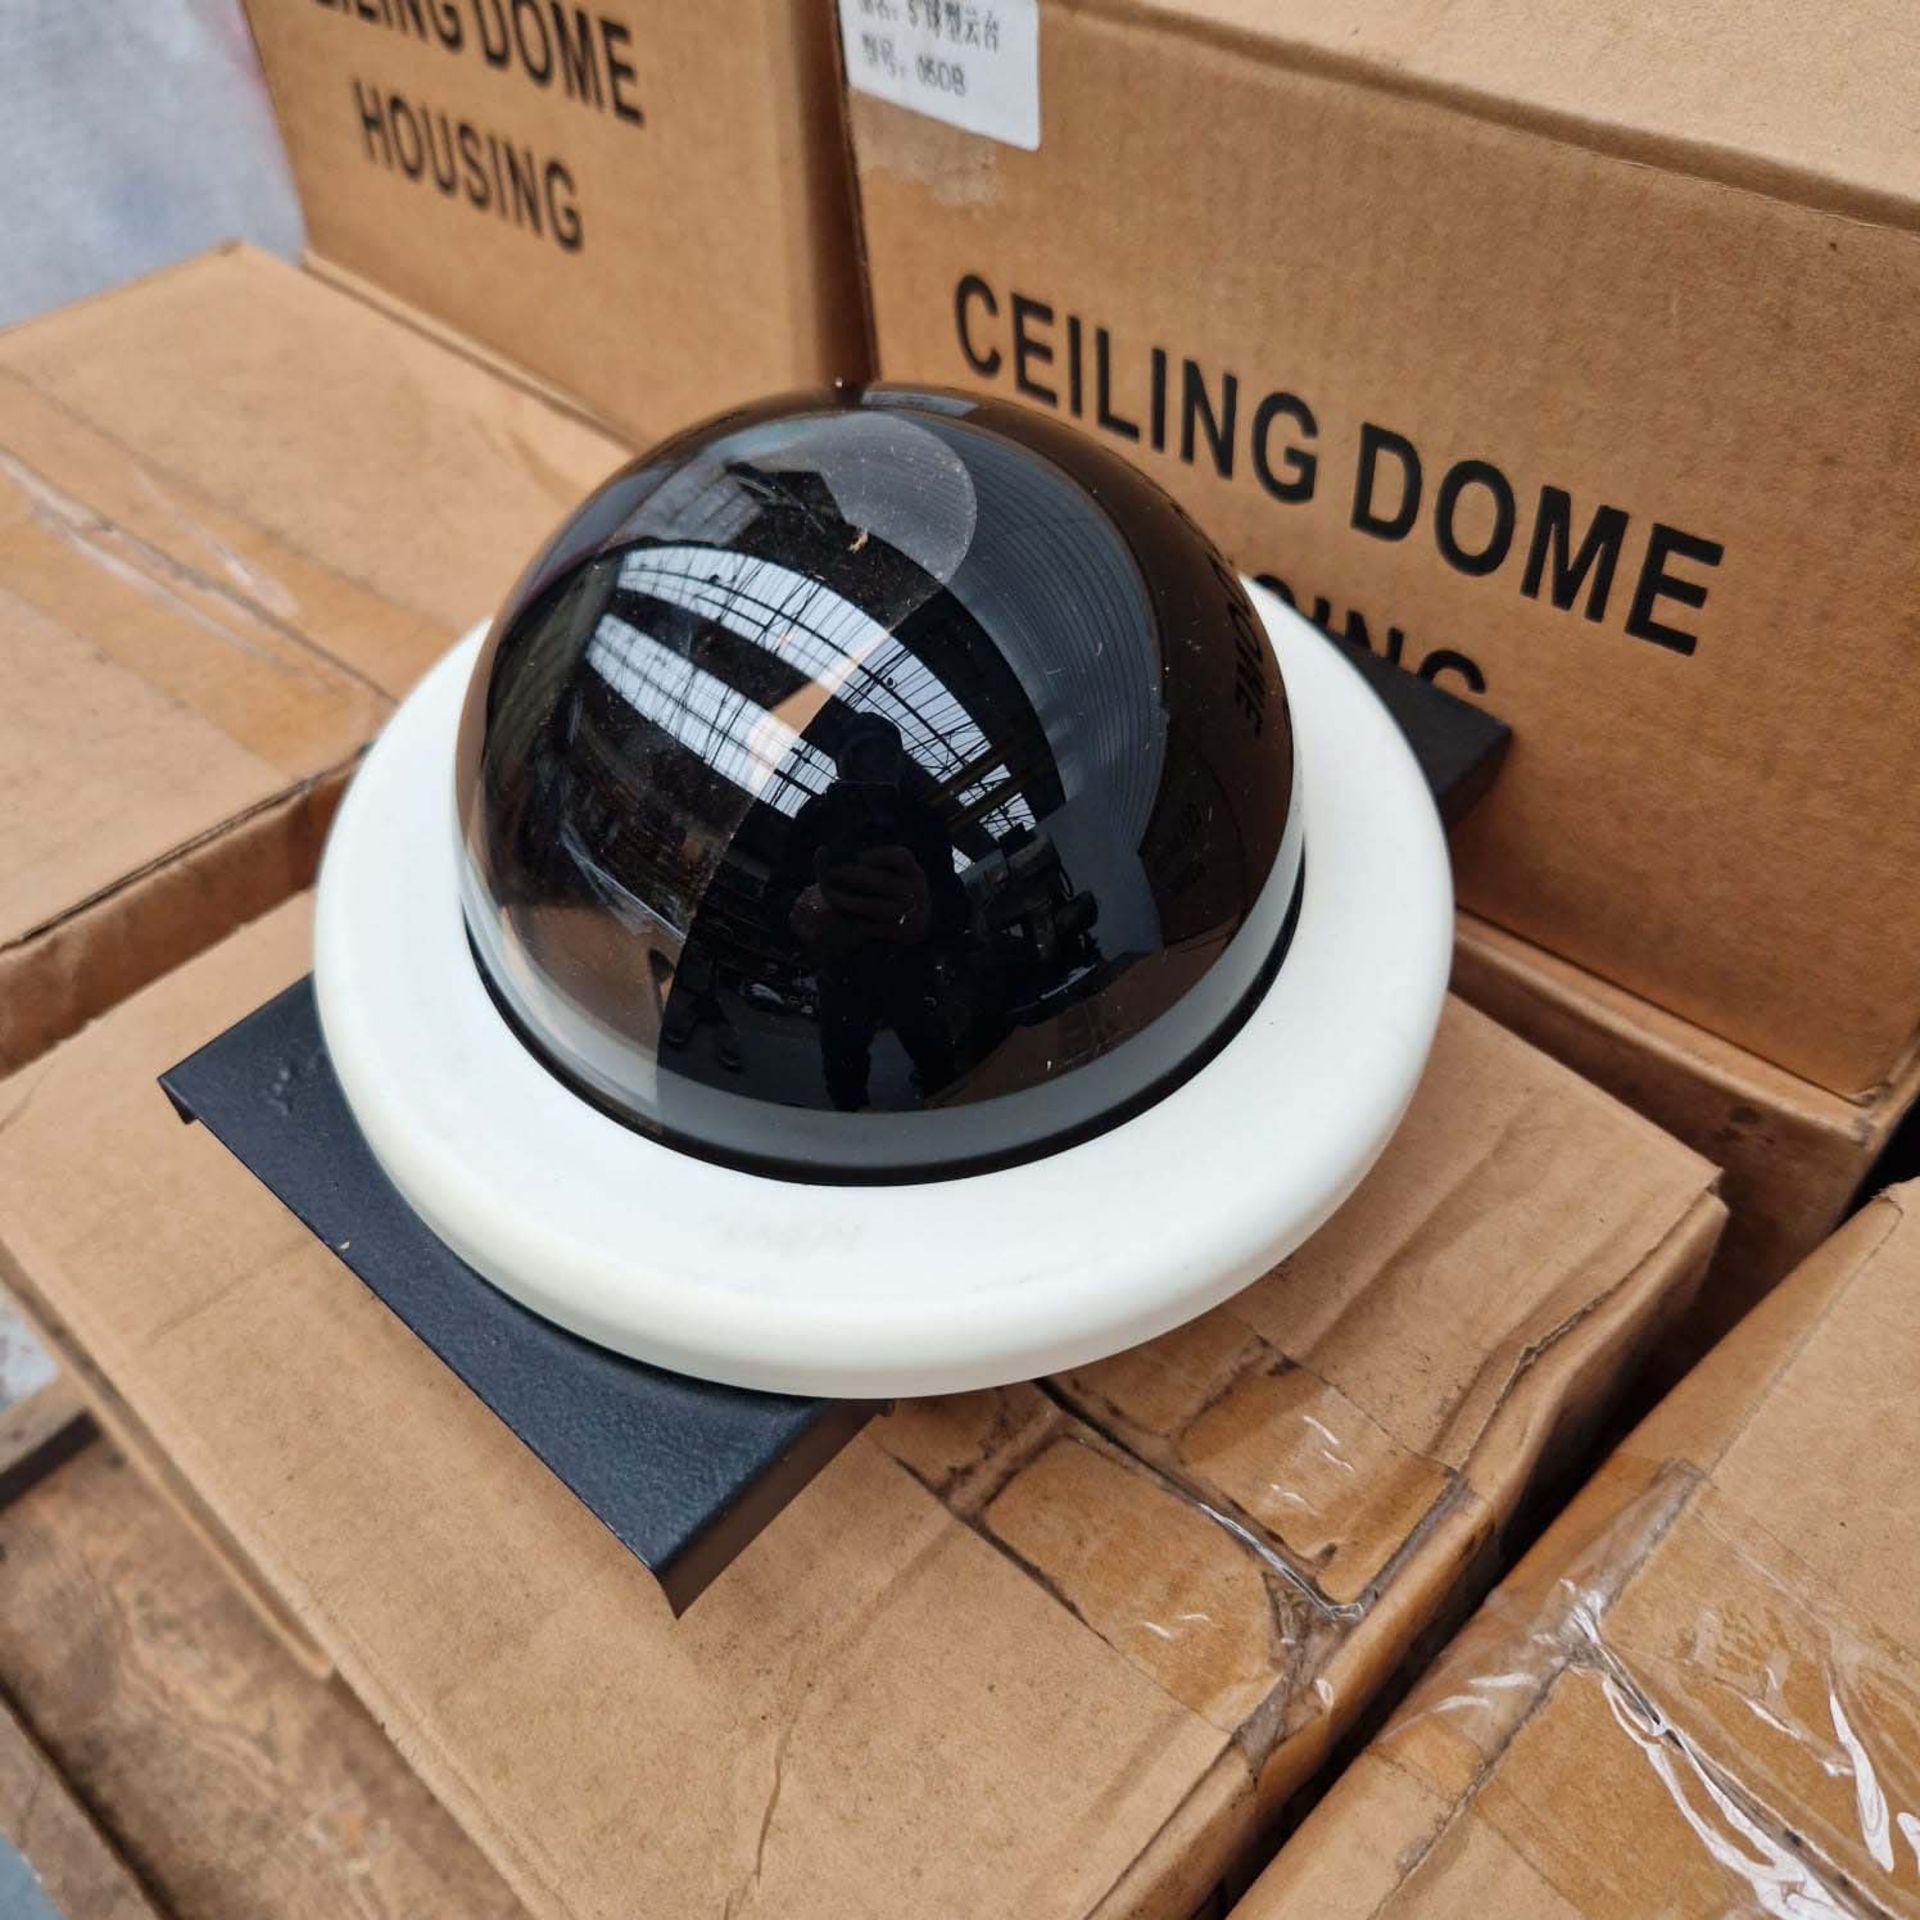 Ceiling Dome Housing Type 05DB x 45 - Image 2 of 4